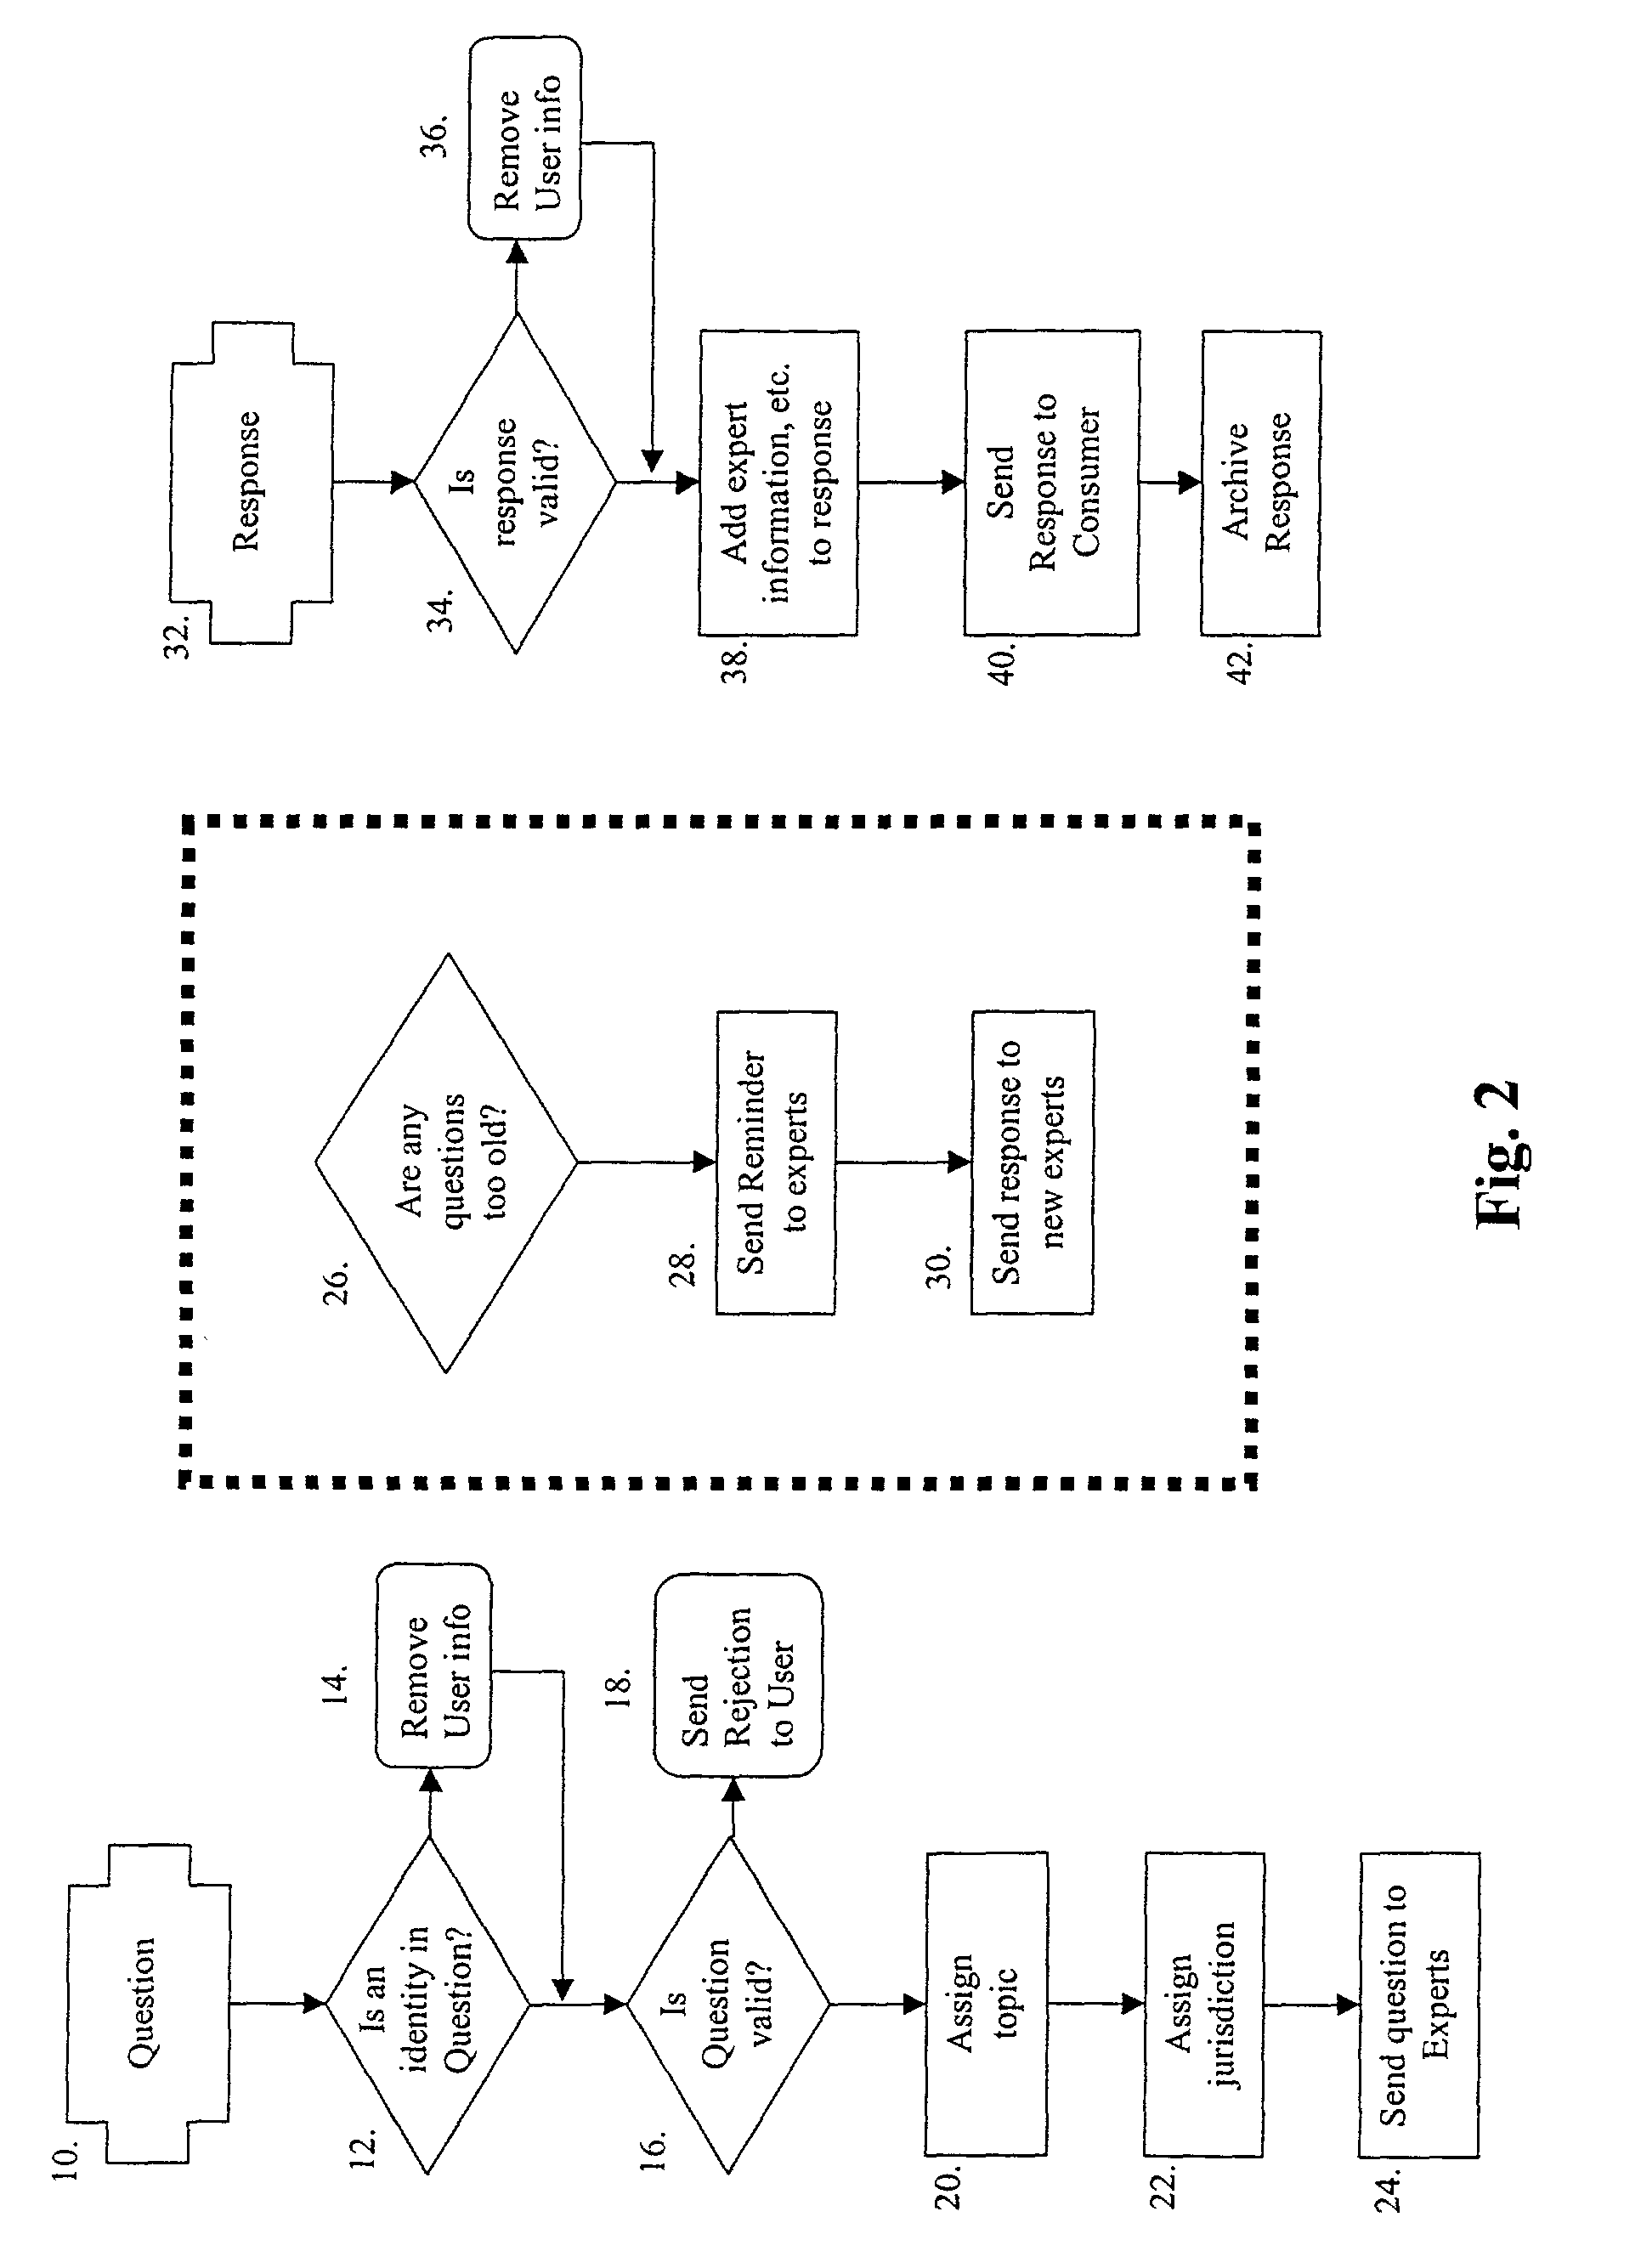 Network based anonymous question and answer system